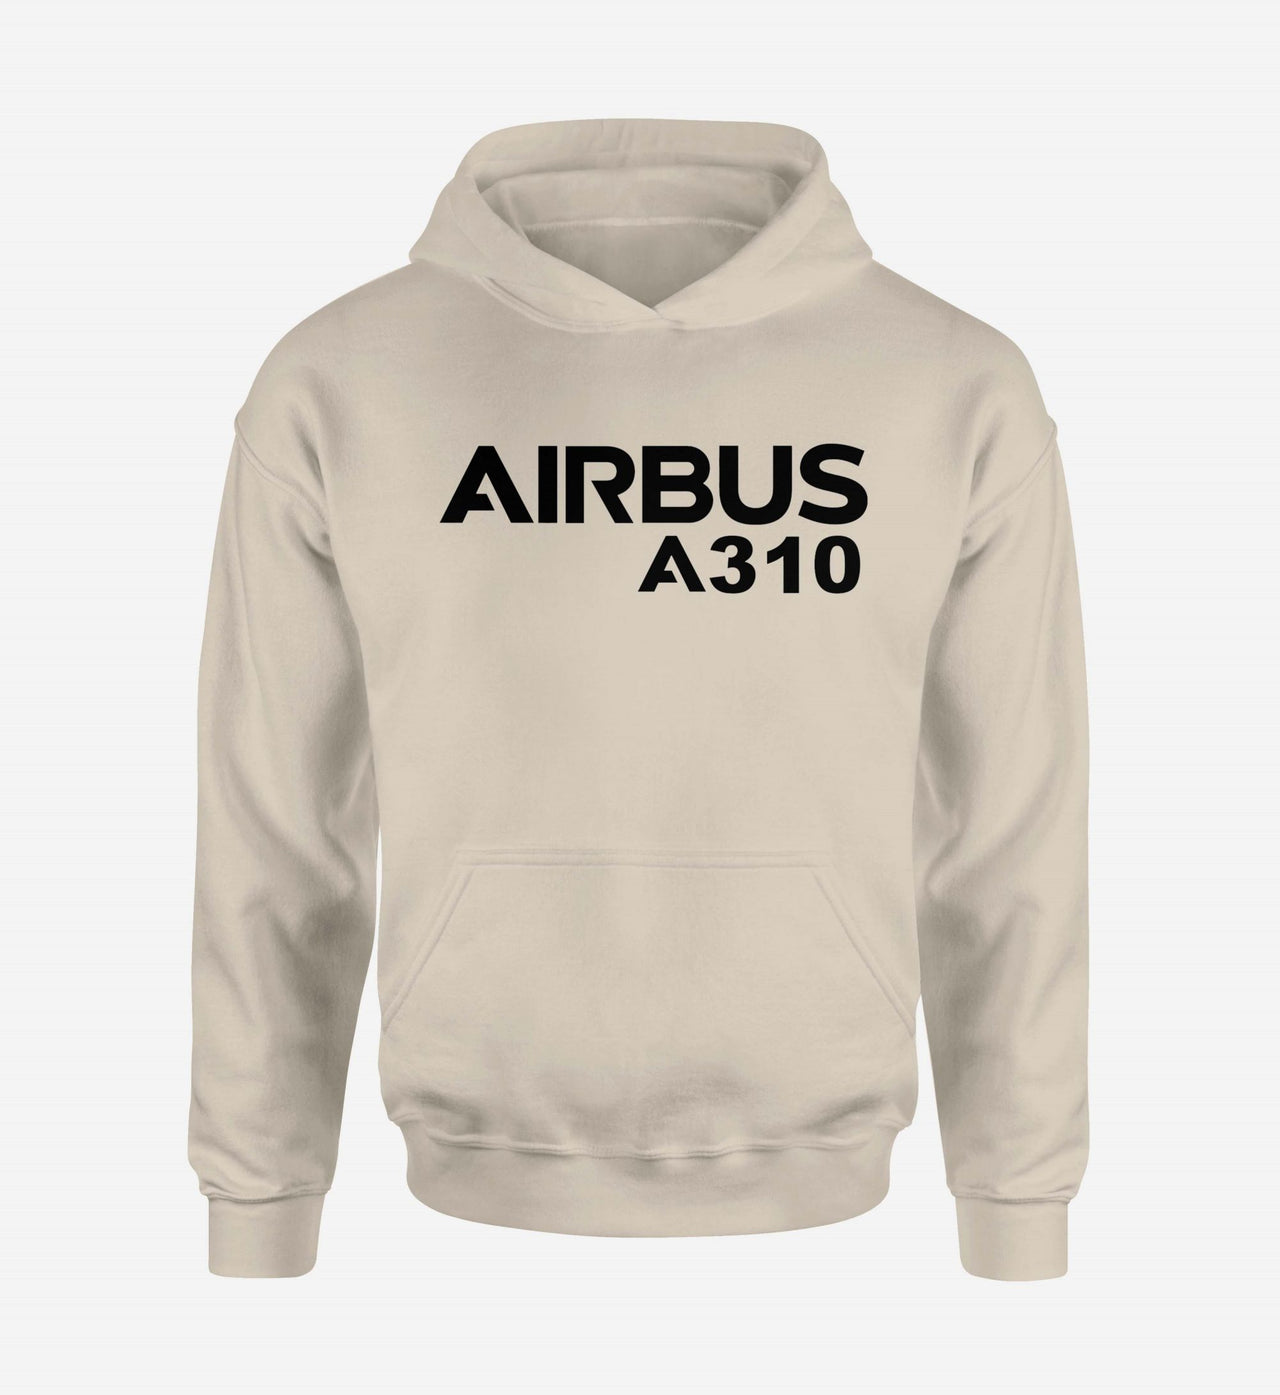 Airbus A310 & Text Designed Hoodies